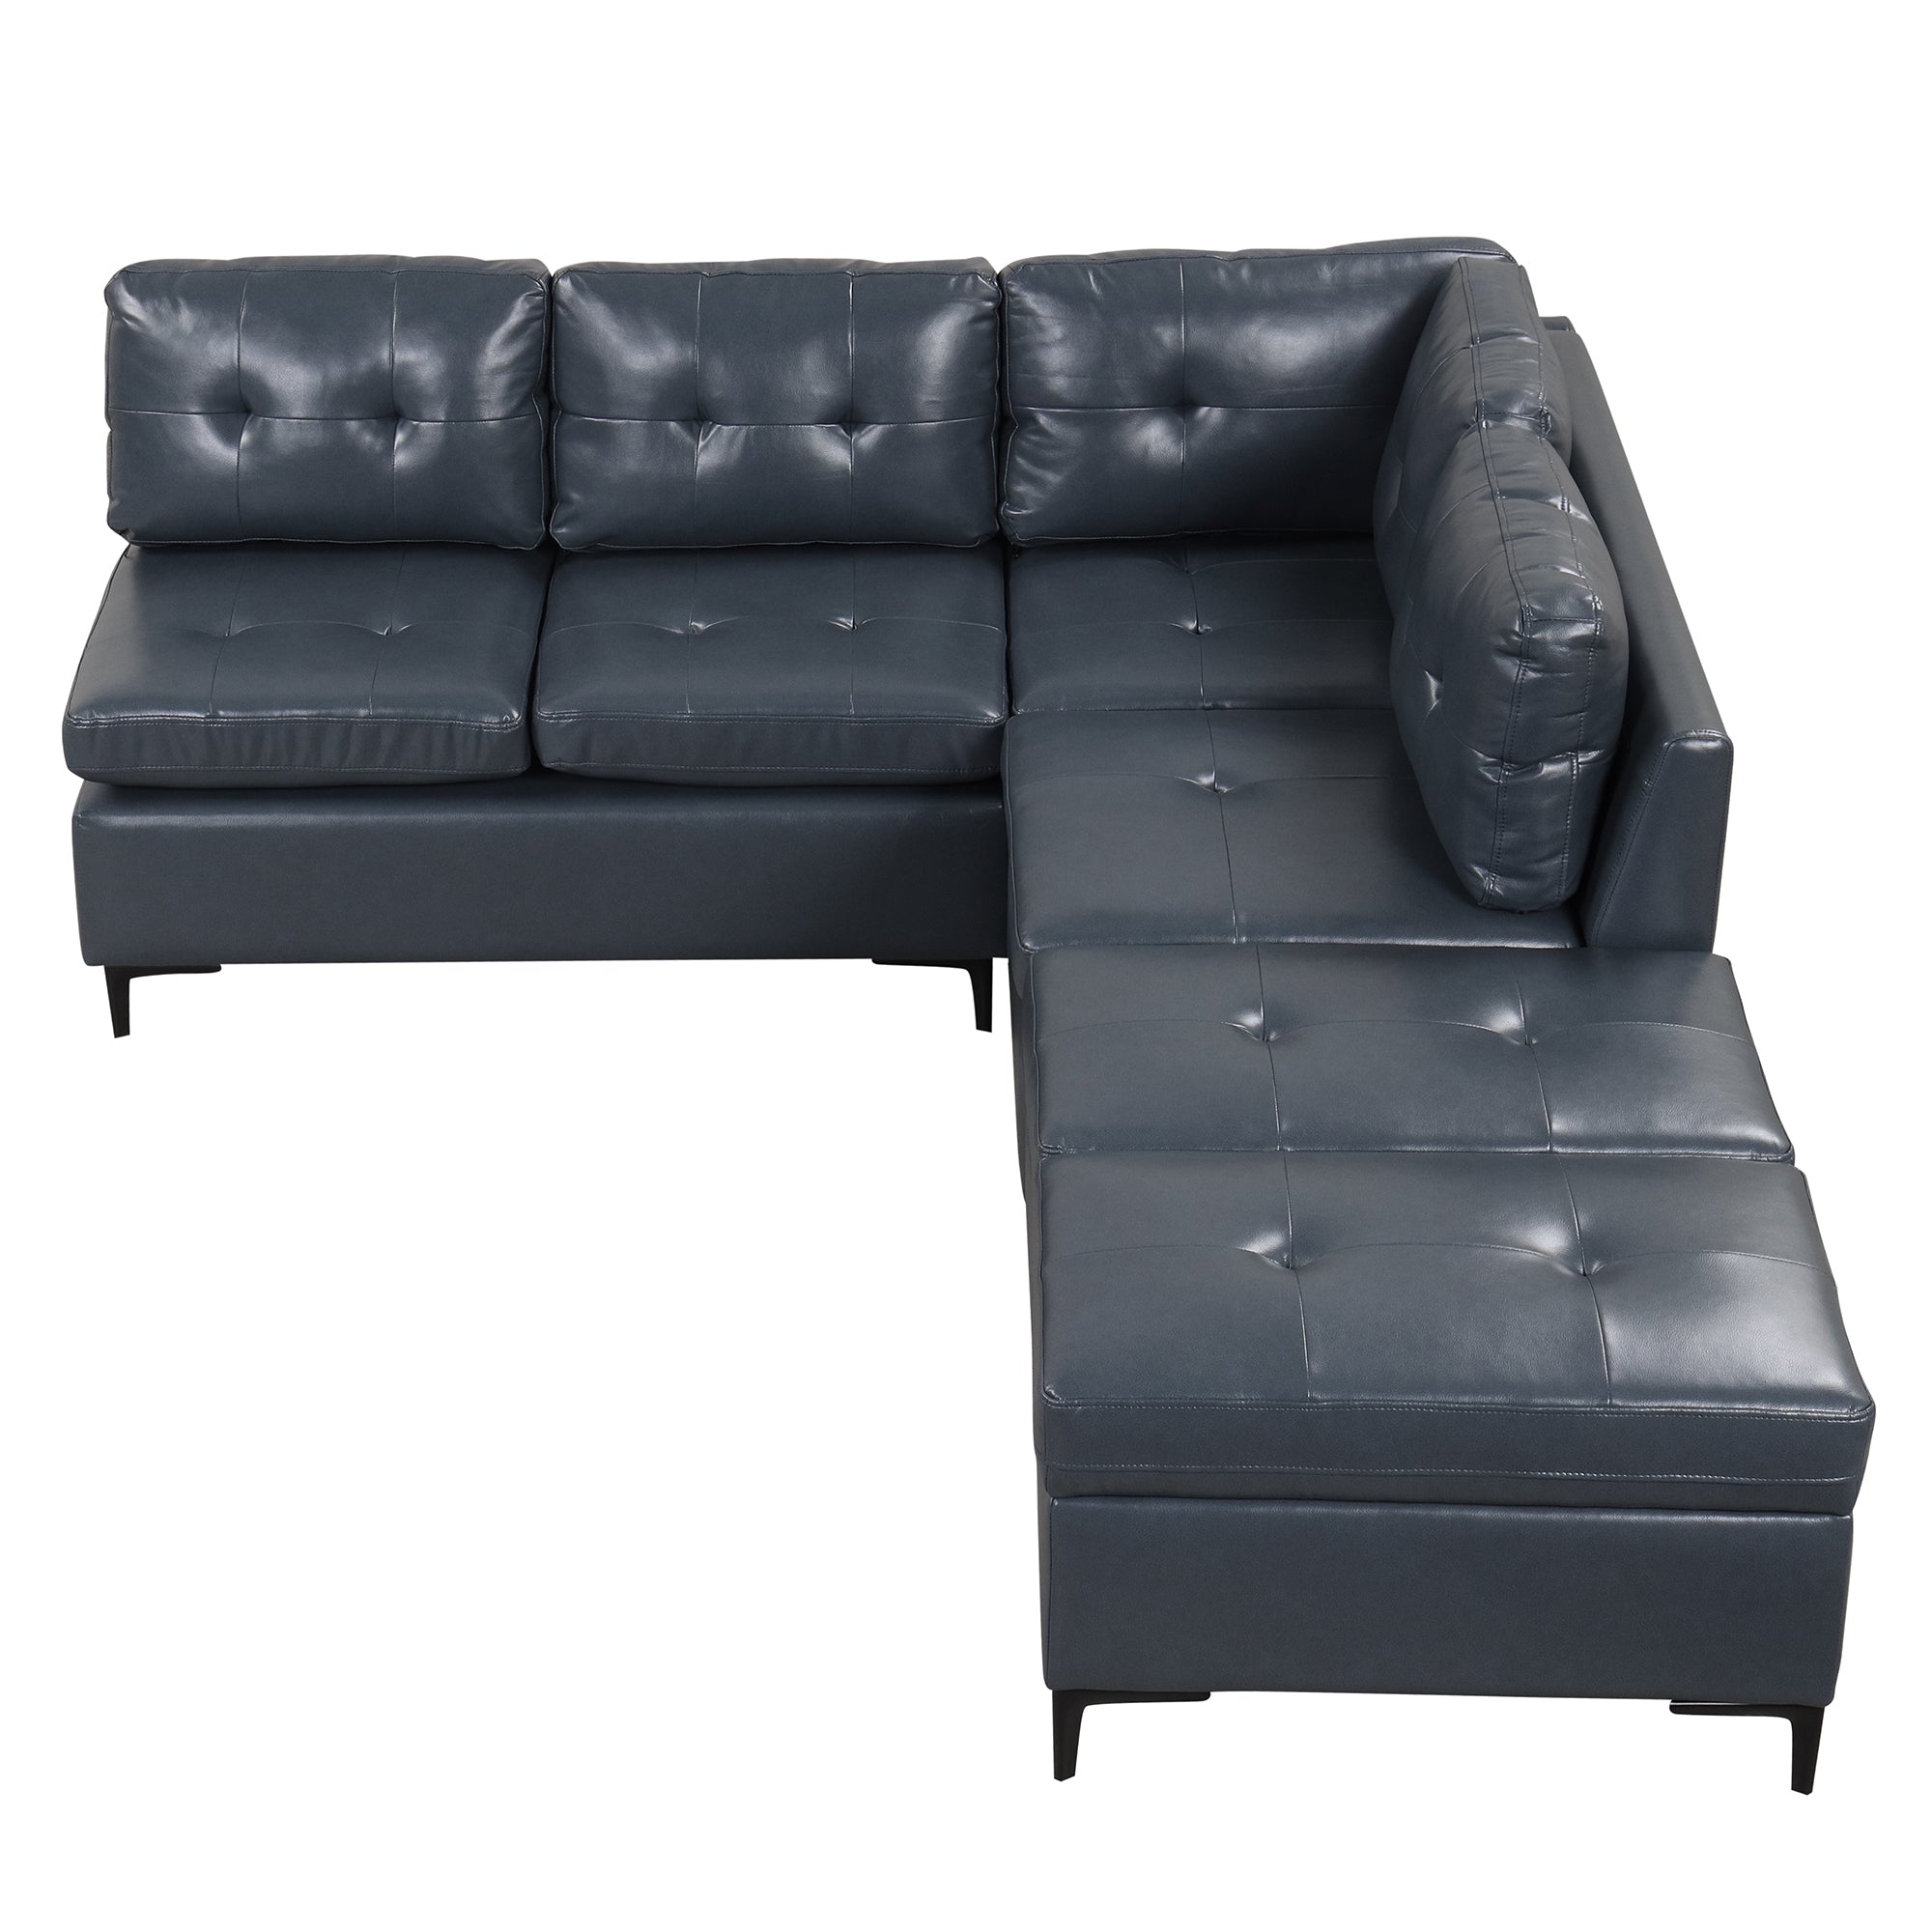 94.88" Dark Gray L-Shaped Sectional Sofa with Storage Ottomans, PU Leather Living Room Couch-Stationary Sectionals-American Furniture Outlet